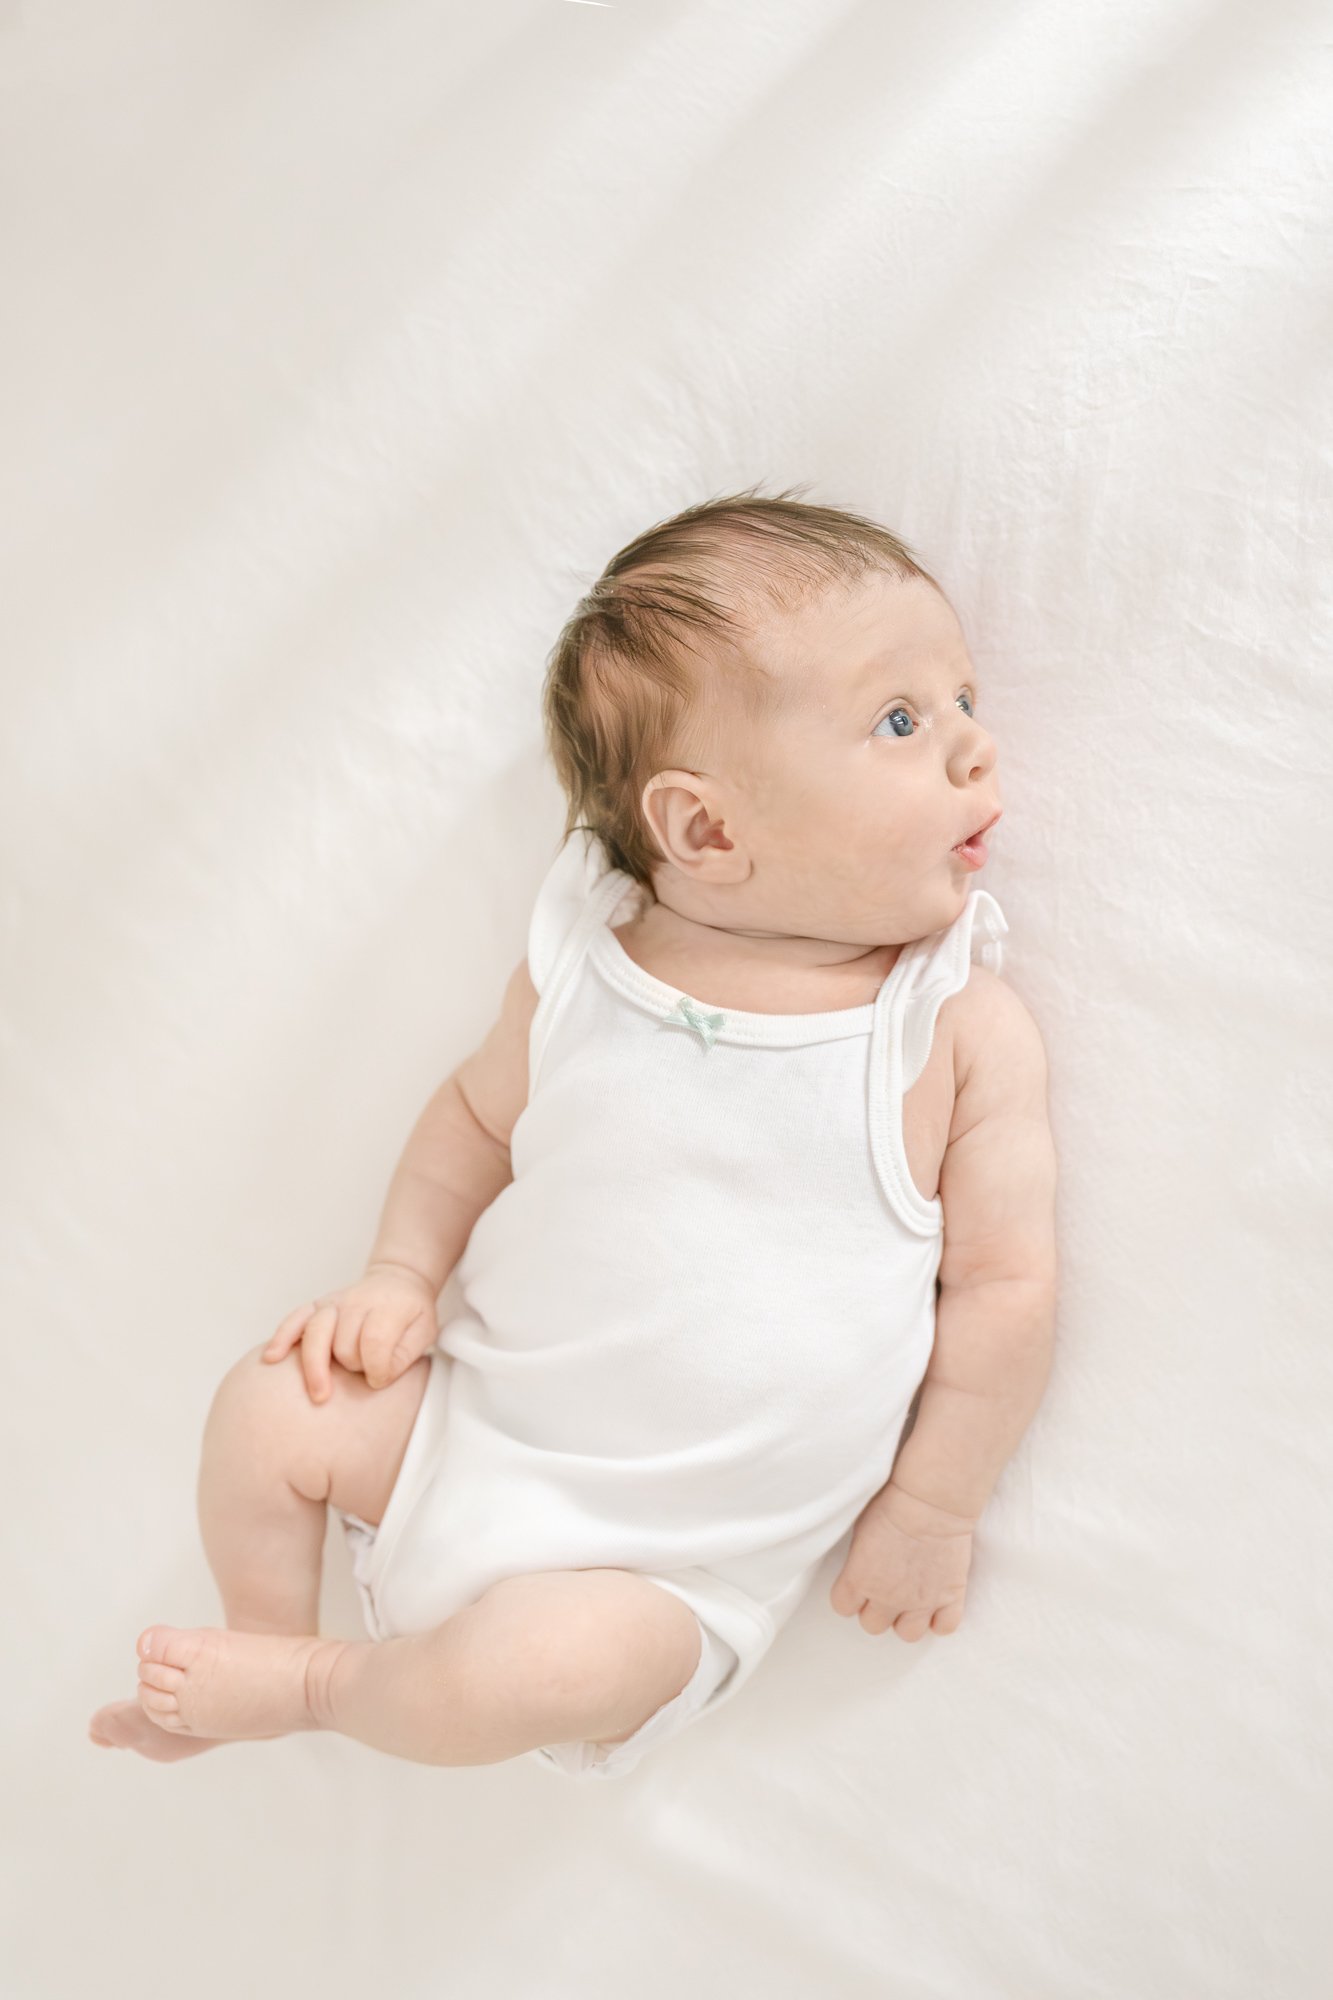  In the comfort of your home, Nicole Hawkins Photography, your North Central New Jersey Newborn Photographer, skillfully captures a precious, scrunched newborn face, ensuring timeless memories that will last a lifetime. #centralNewJerseyphotographer 